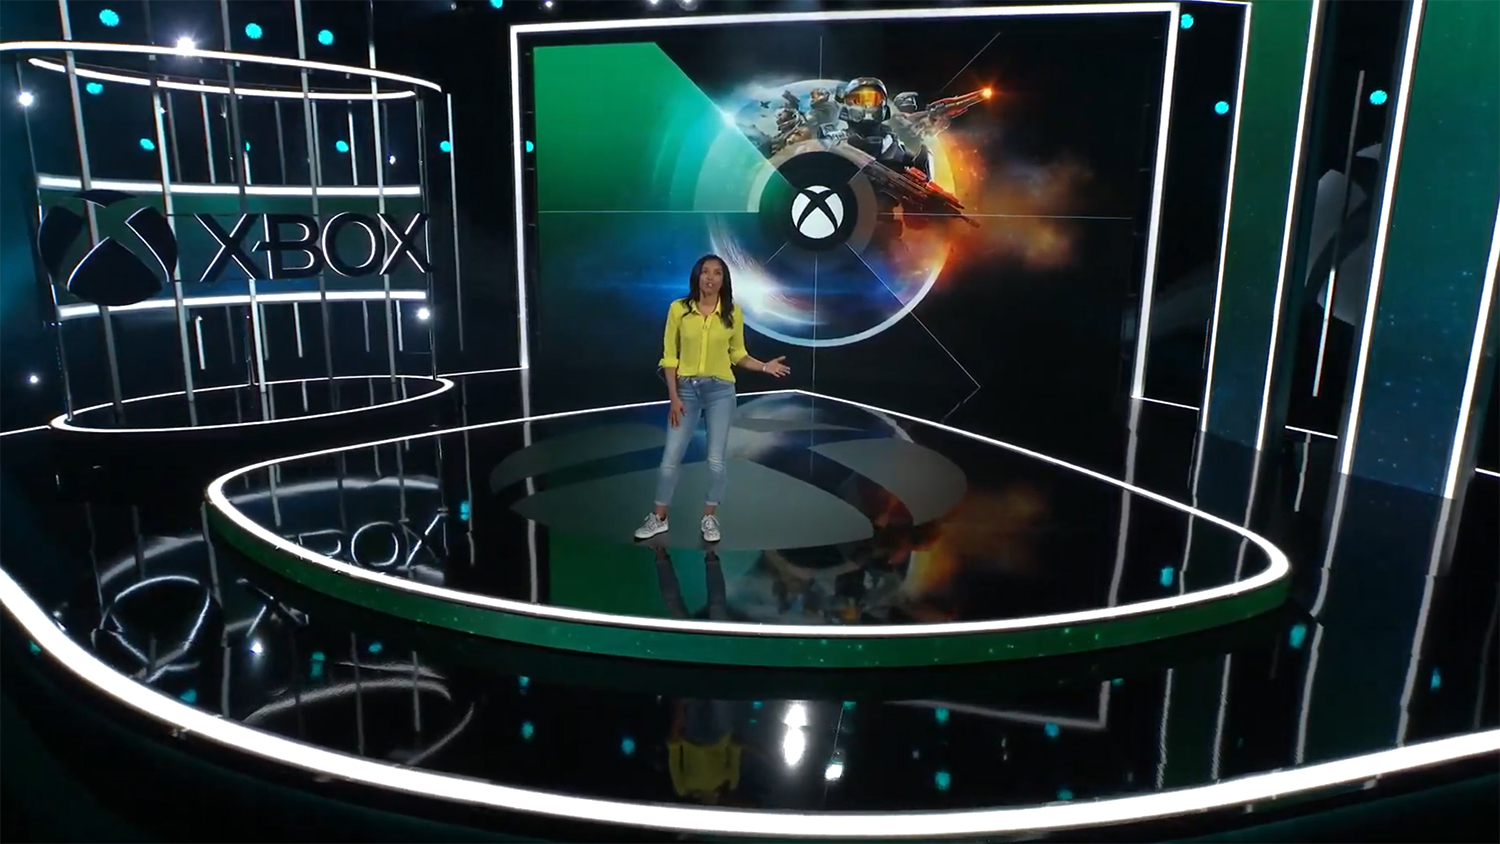 Xbox And Bethesda Games Showcase E3 2021 Watch Along With Game Informer -  Game Informer